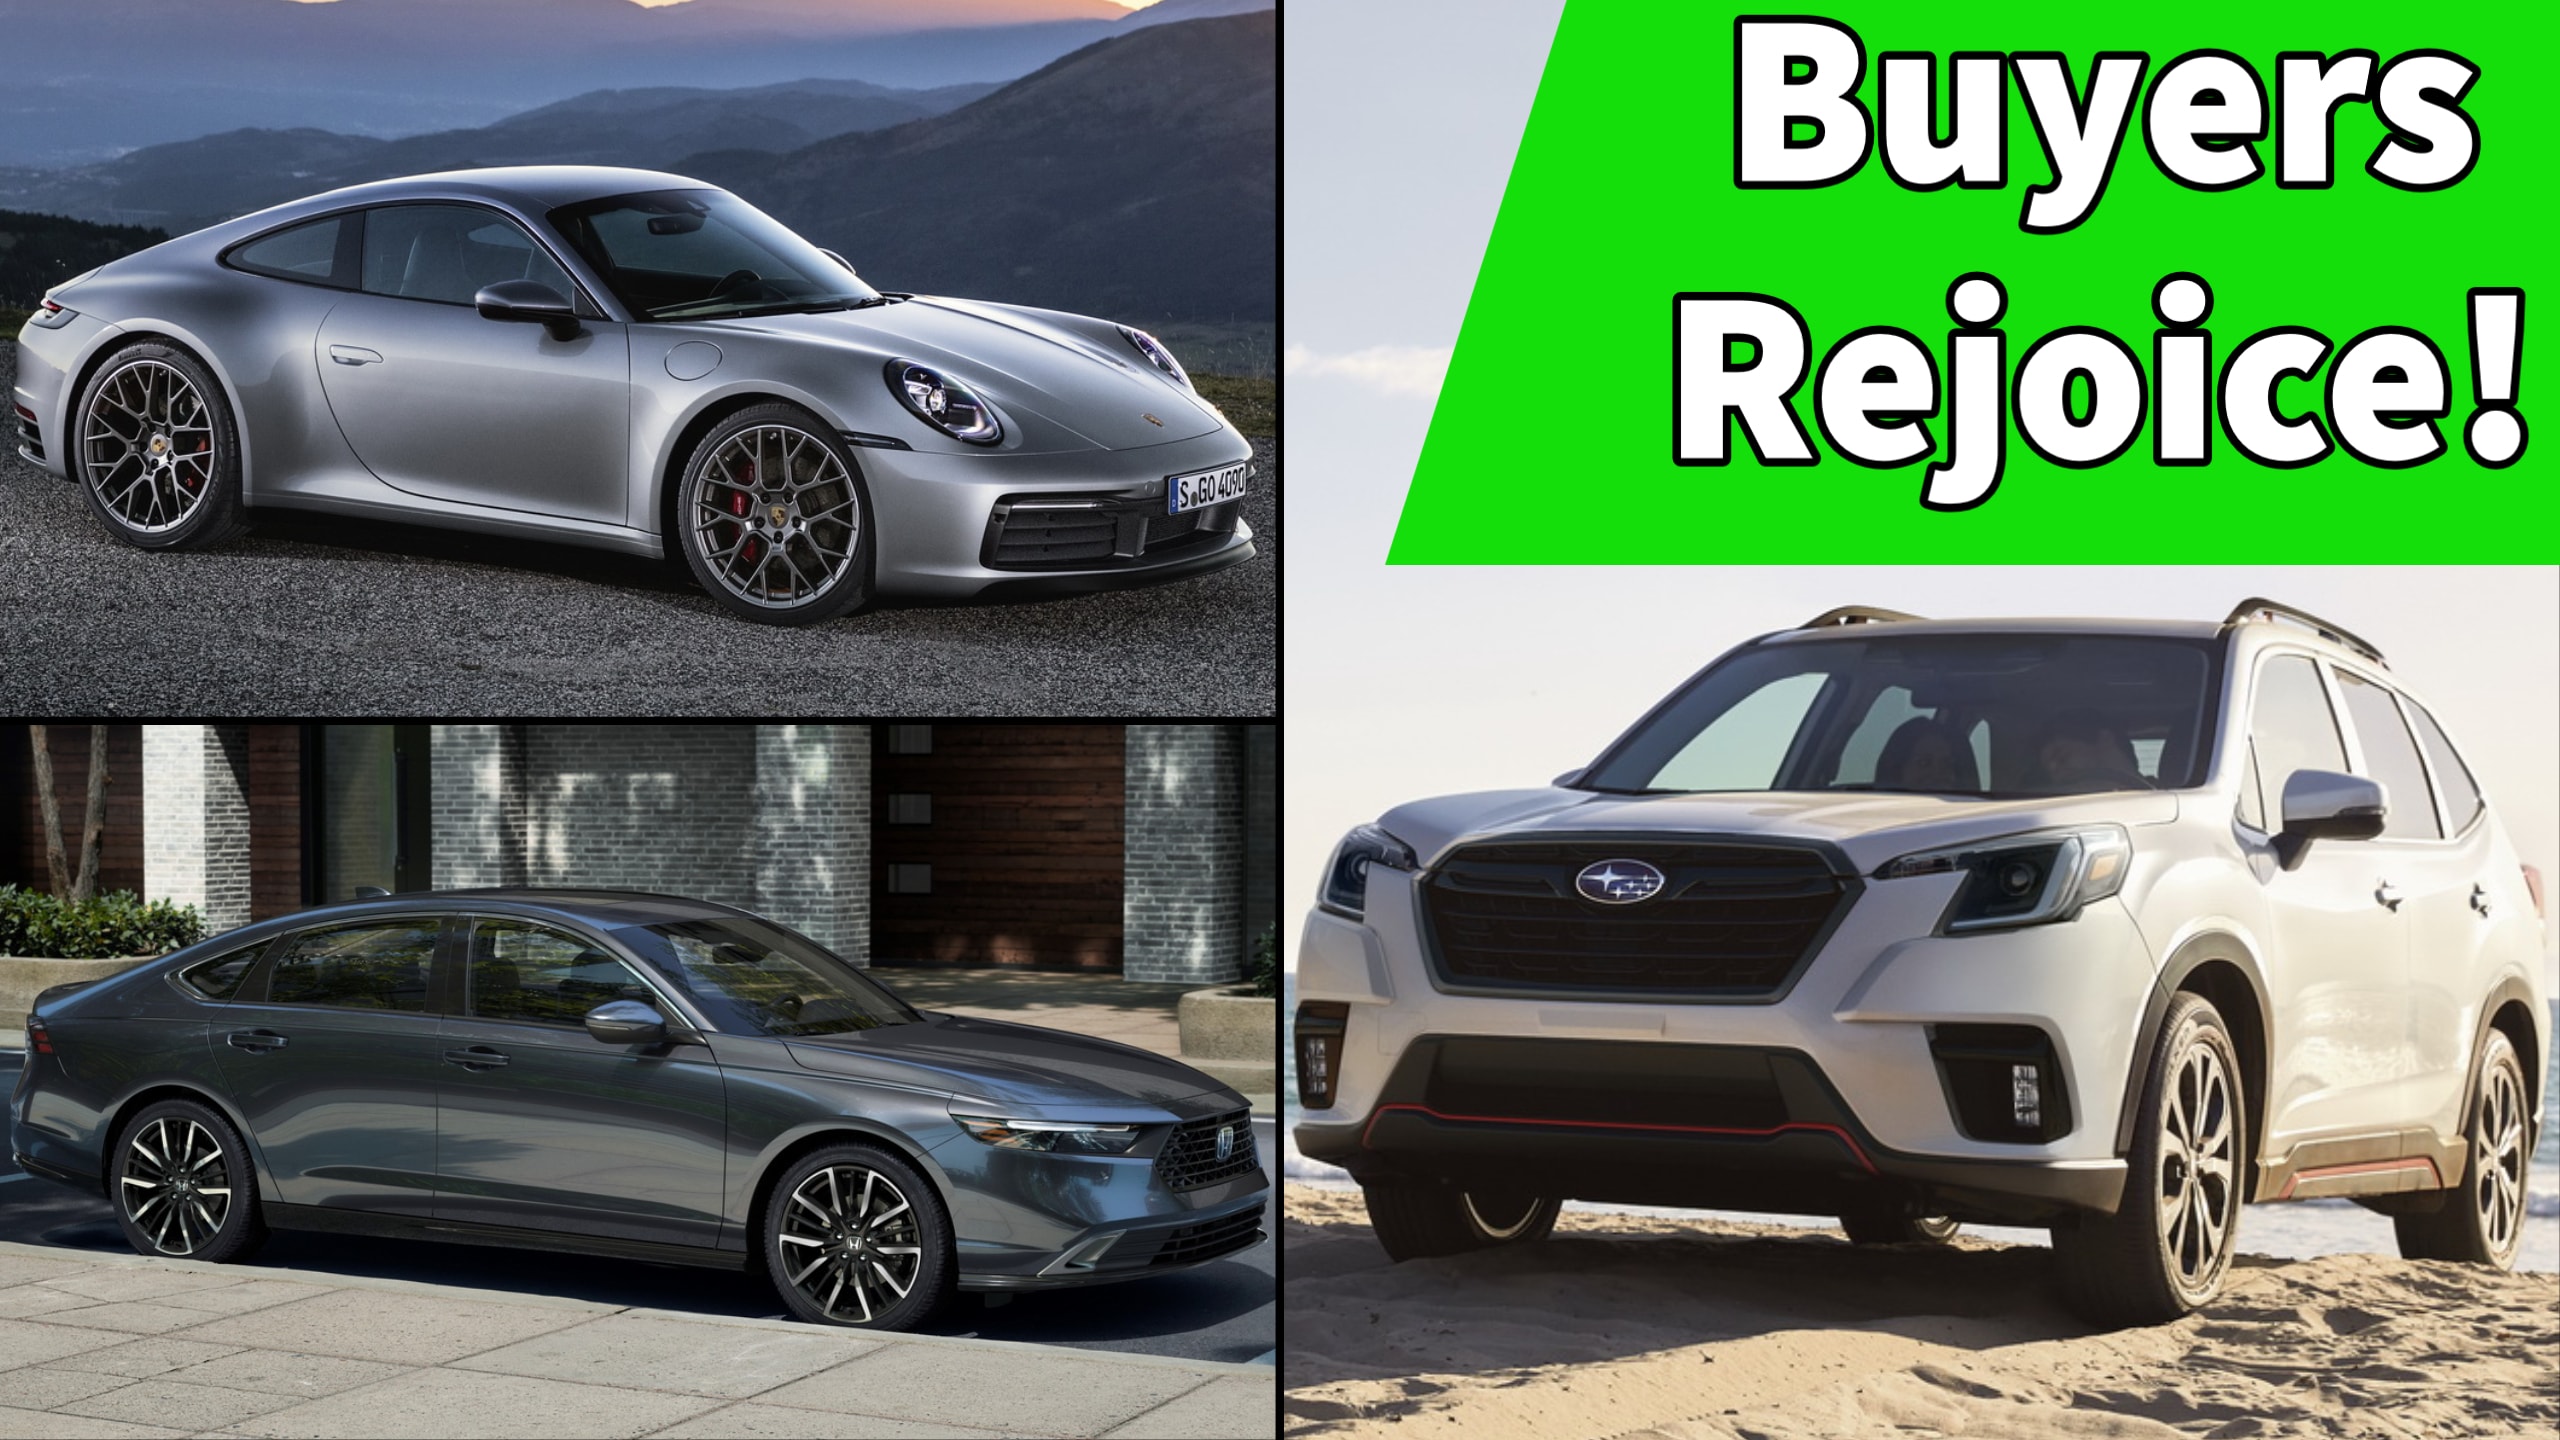 Top 10 Cars With the Best Resale Value - Let's Take a Look!